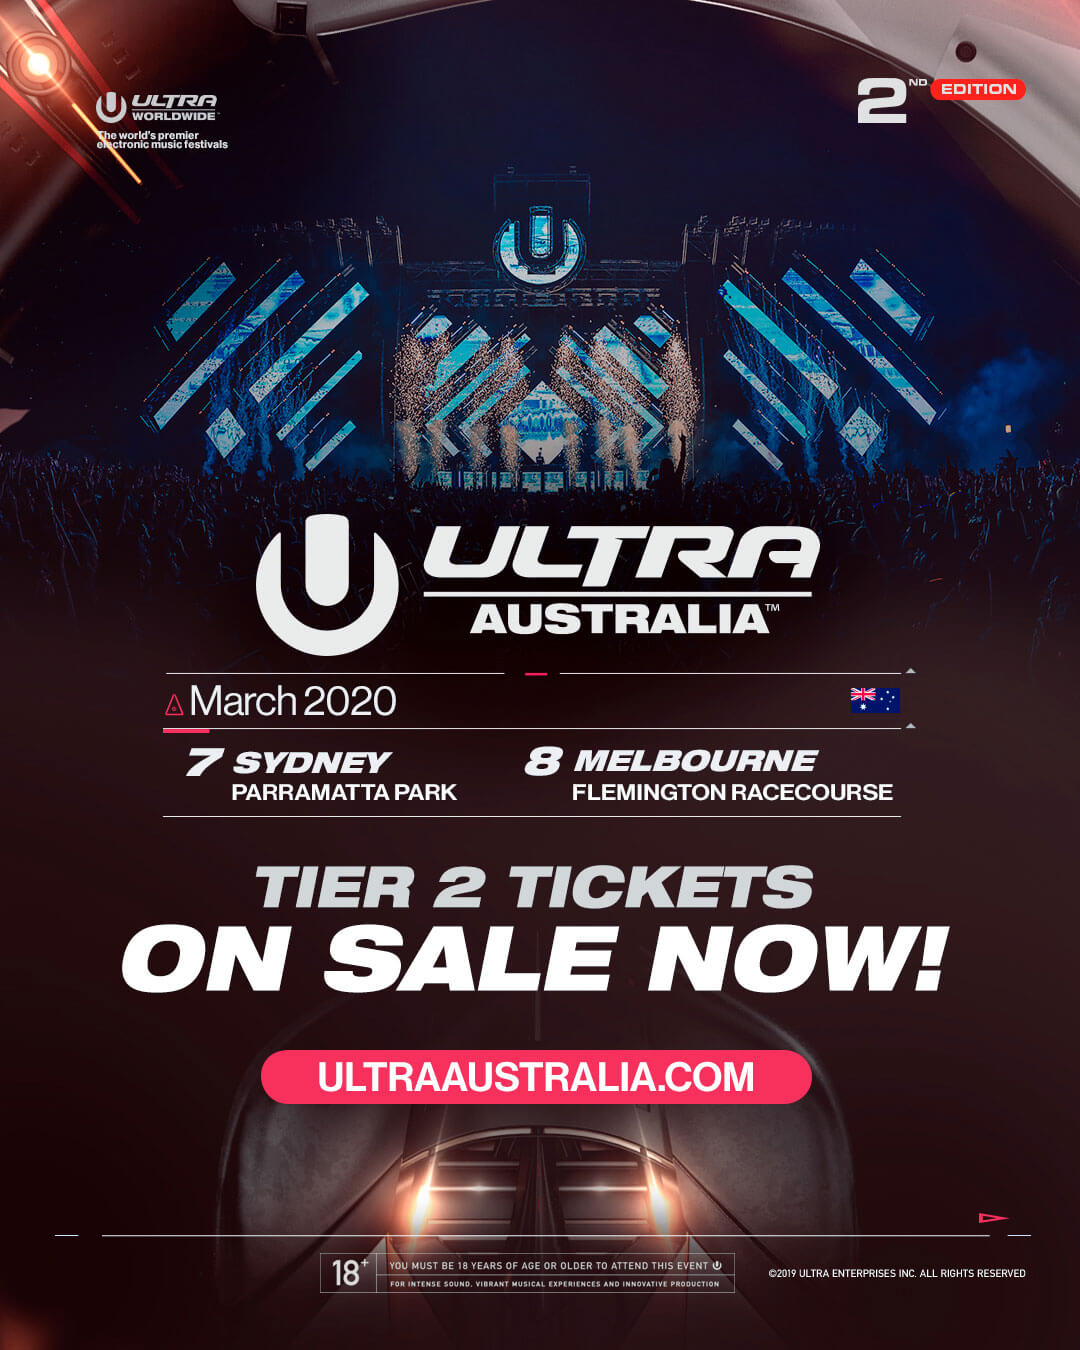 Tickets for ULTRA Australia 2020 are on sale now! - Ultra Japan